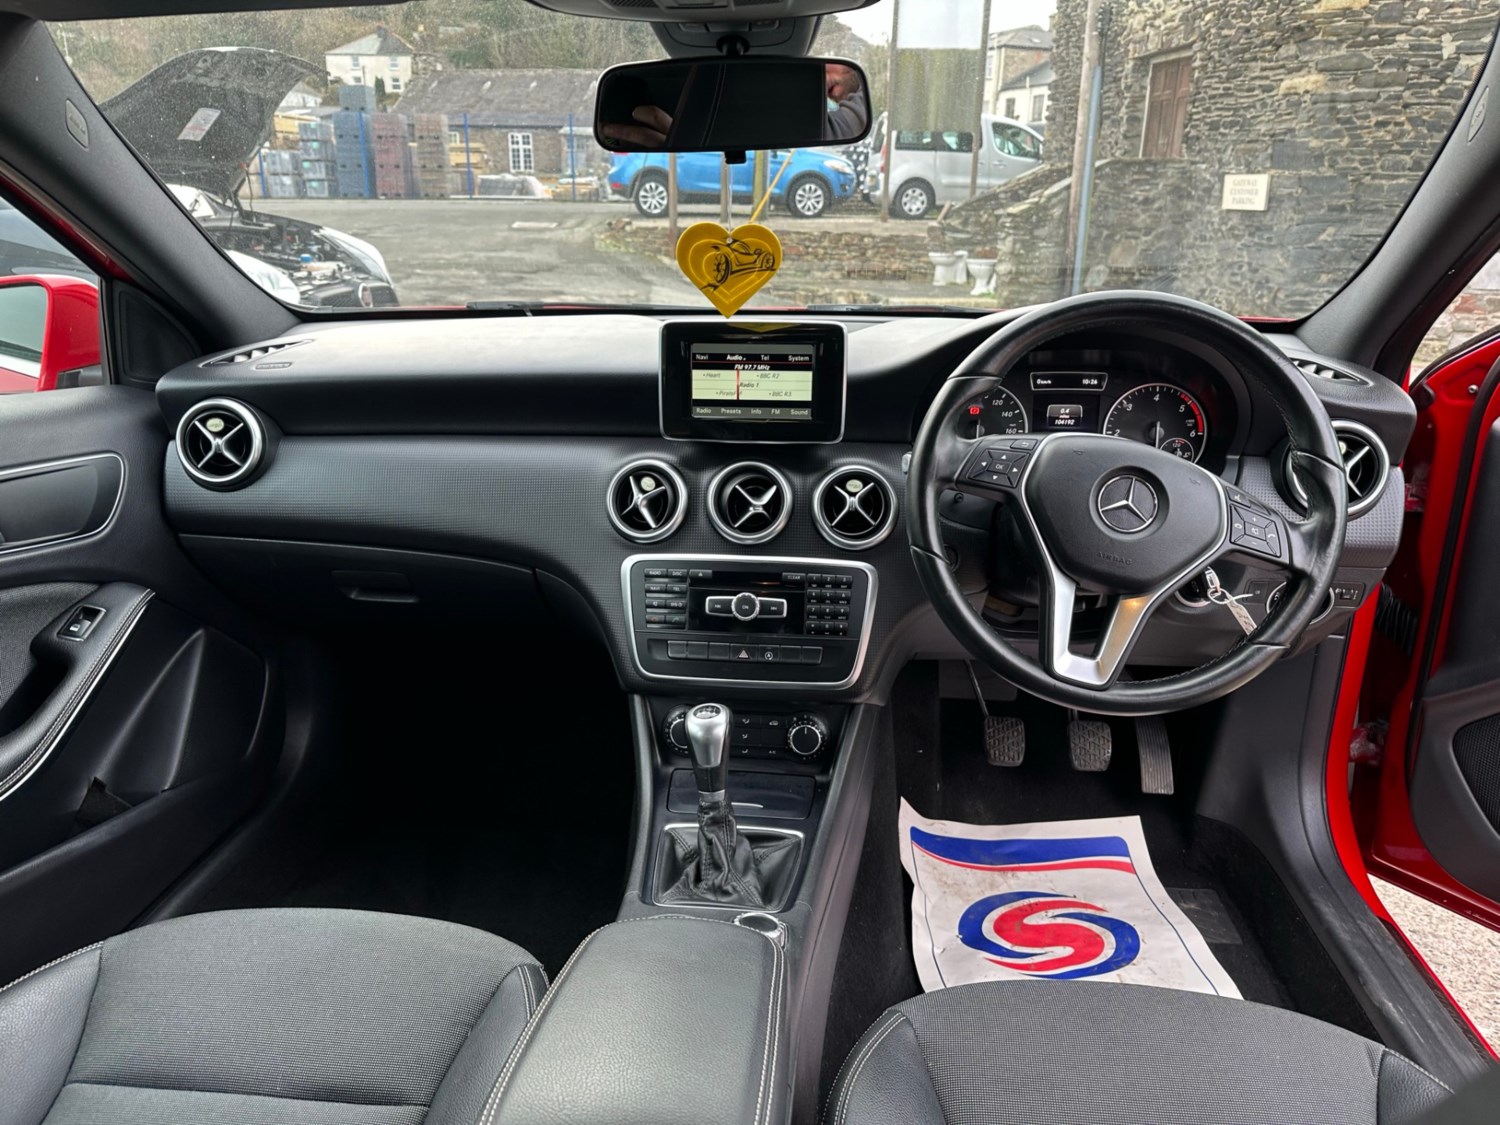 2015 (15) Mercedes-Benz A Class A180 CDI BlueEFFICIENCY SE 5dr For Sale In Launceston, Cornwall